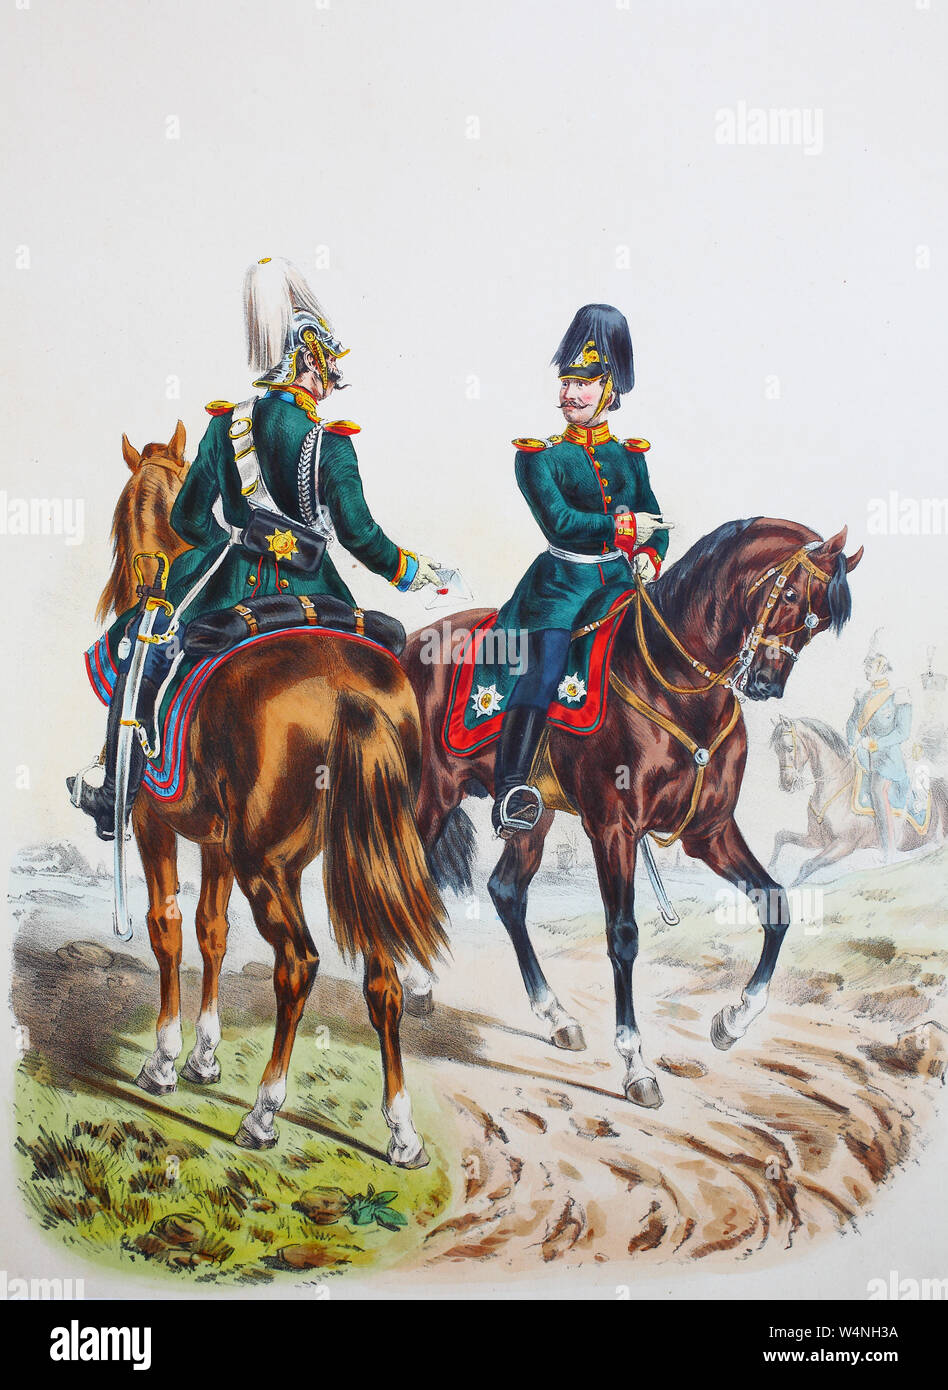 Royal Prussian Army, Guards Corps, Preußens Heer, preussische Garde, Leib Gendarmerie und reitendes Feldjäger Corps, Wachtmeister, Offizier Oberjäger, Digital improved reproduction of an illustration from the 19th century Stock Photo